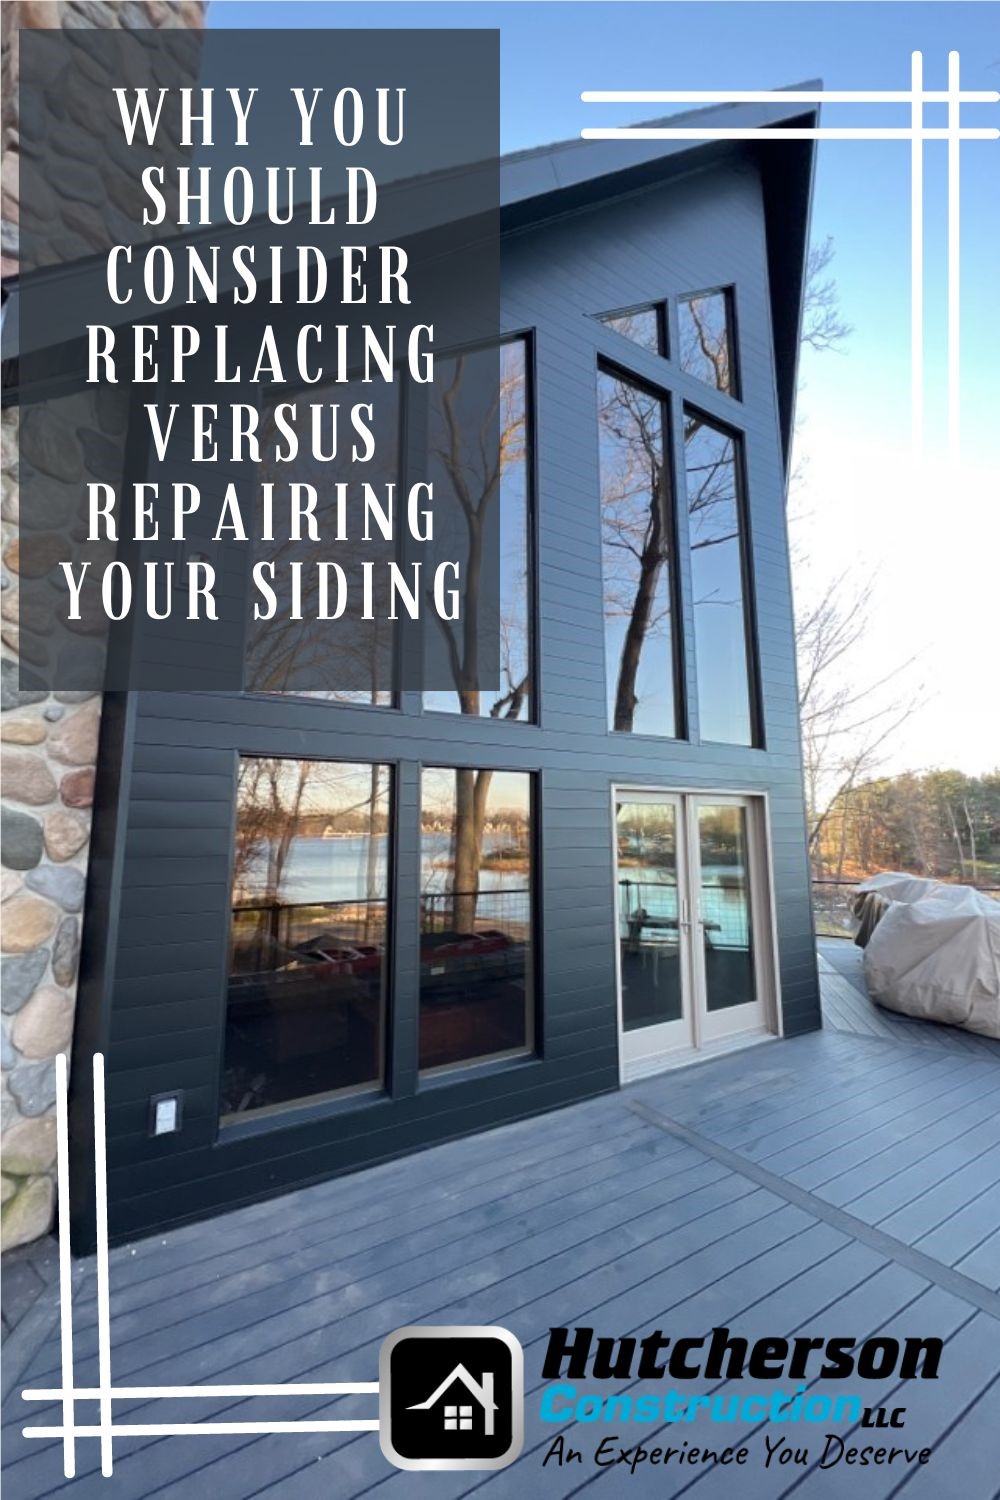 Why You Should Consider Replacing Versus Repairing Your Siding